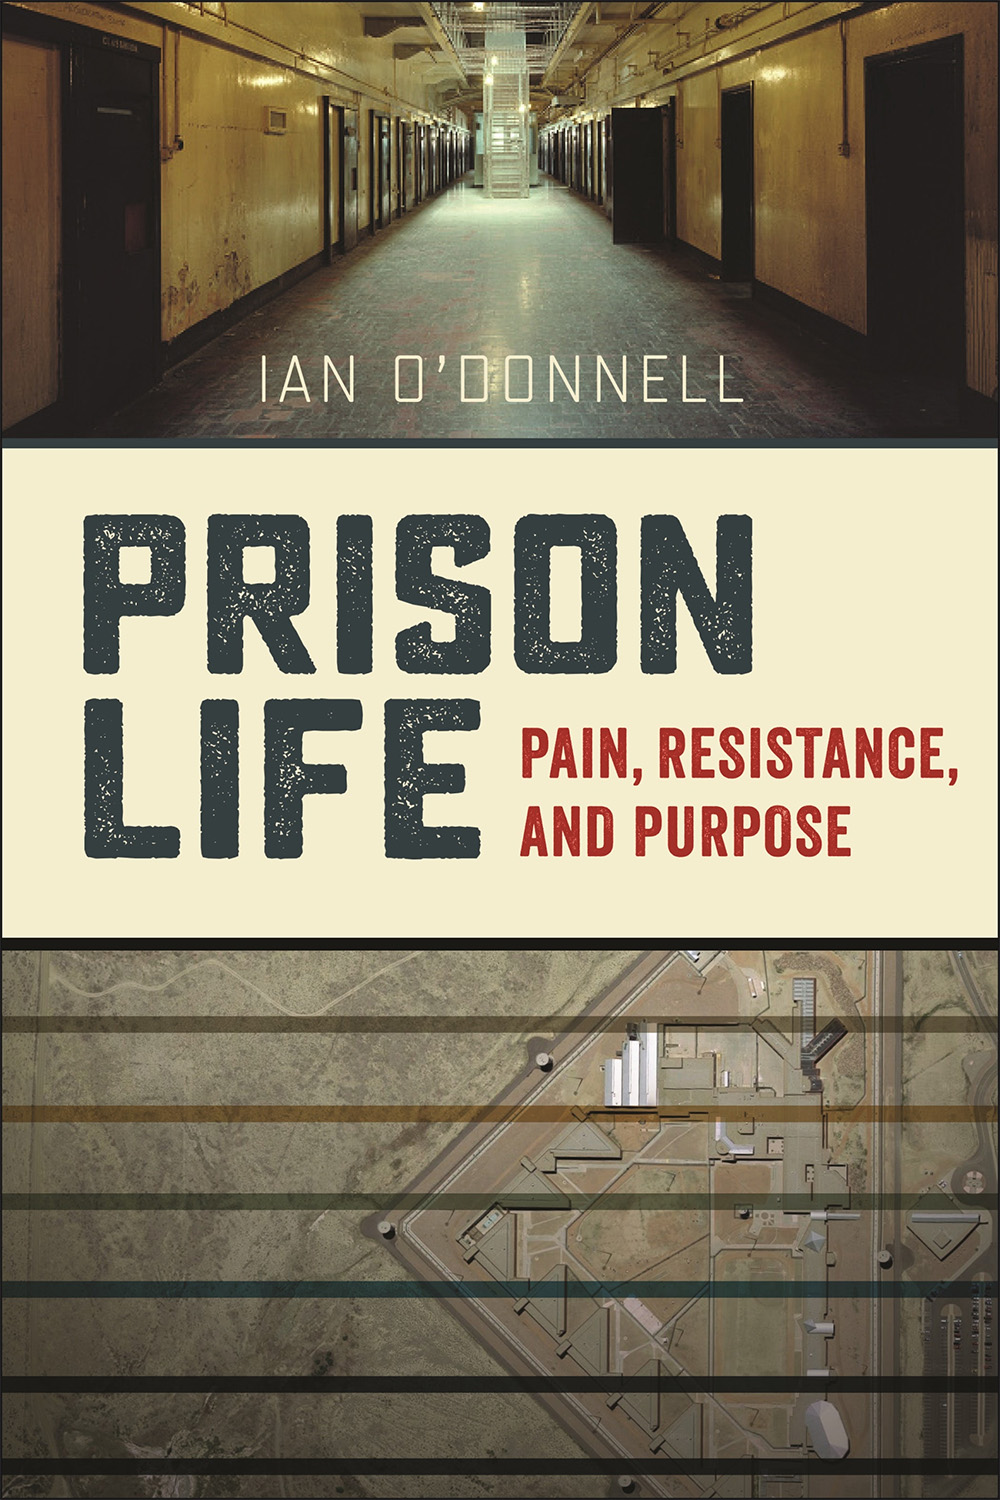 Review: Fascinating prison experiences revealed